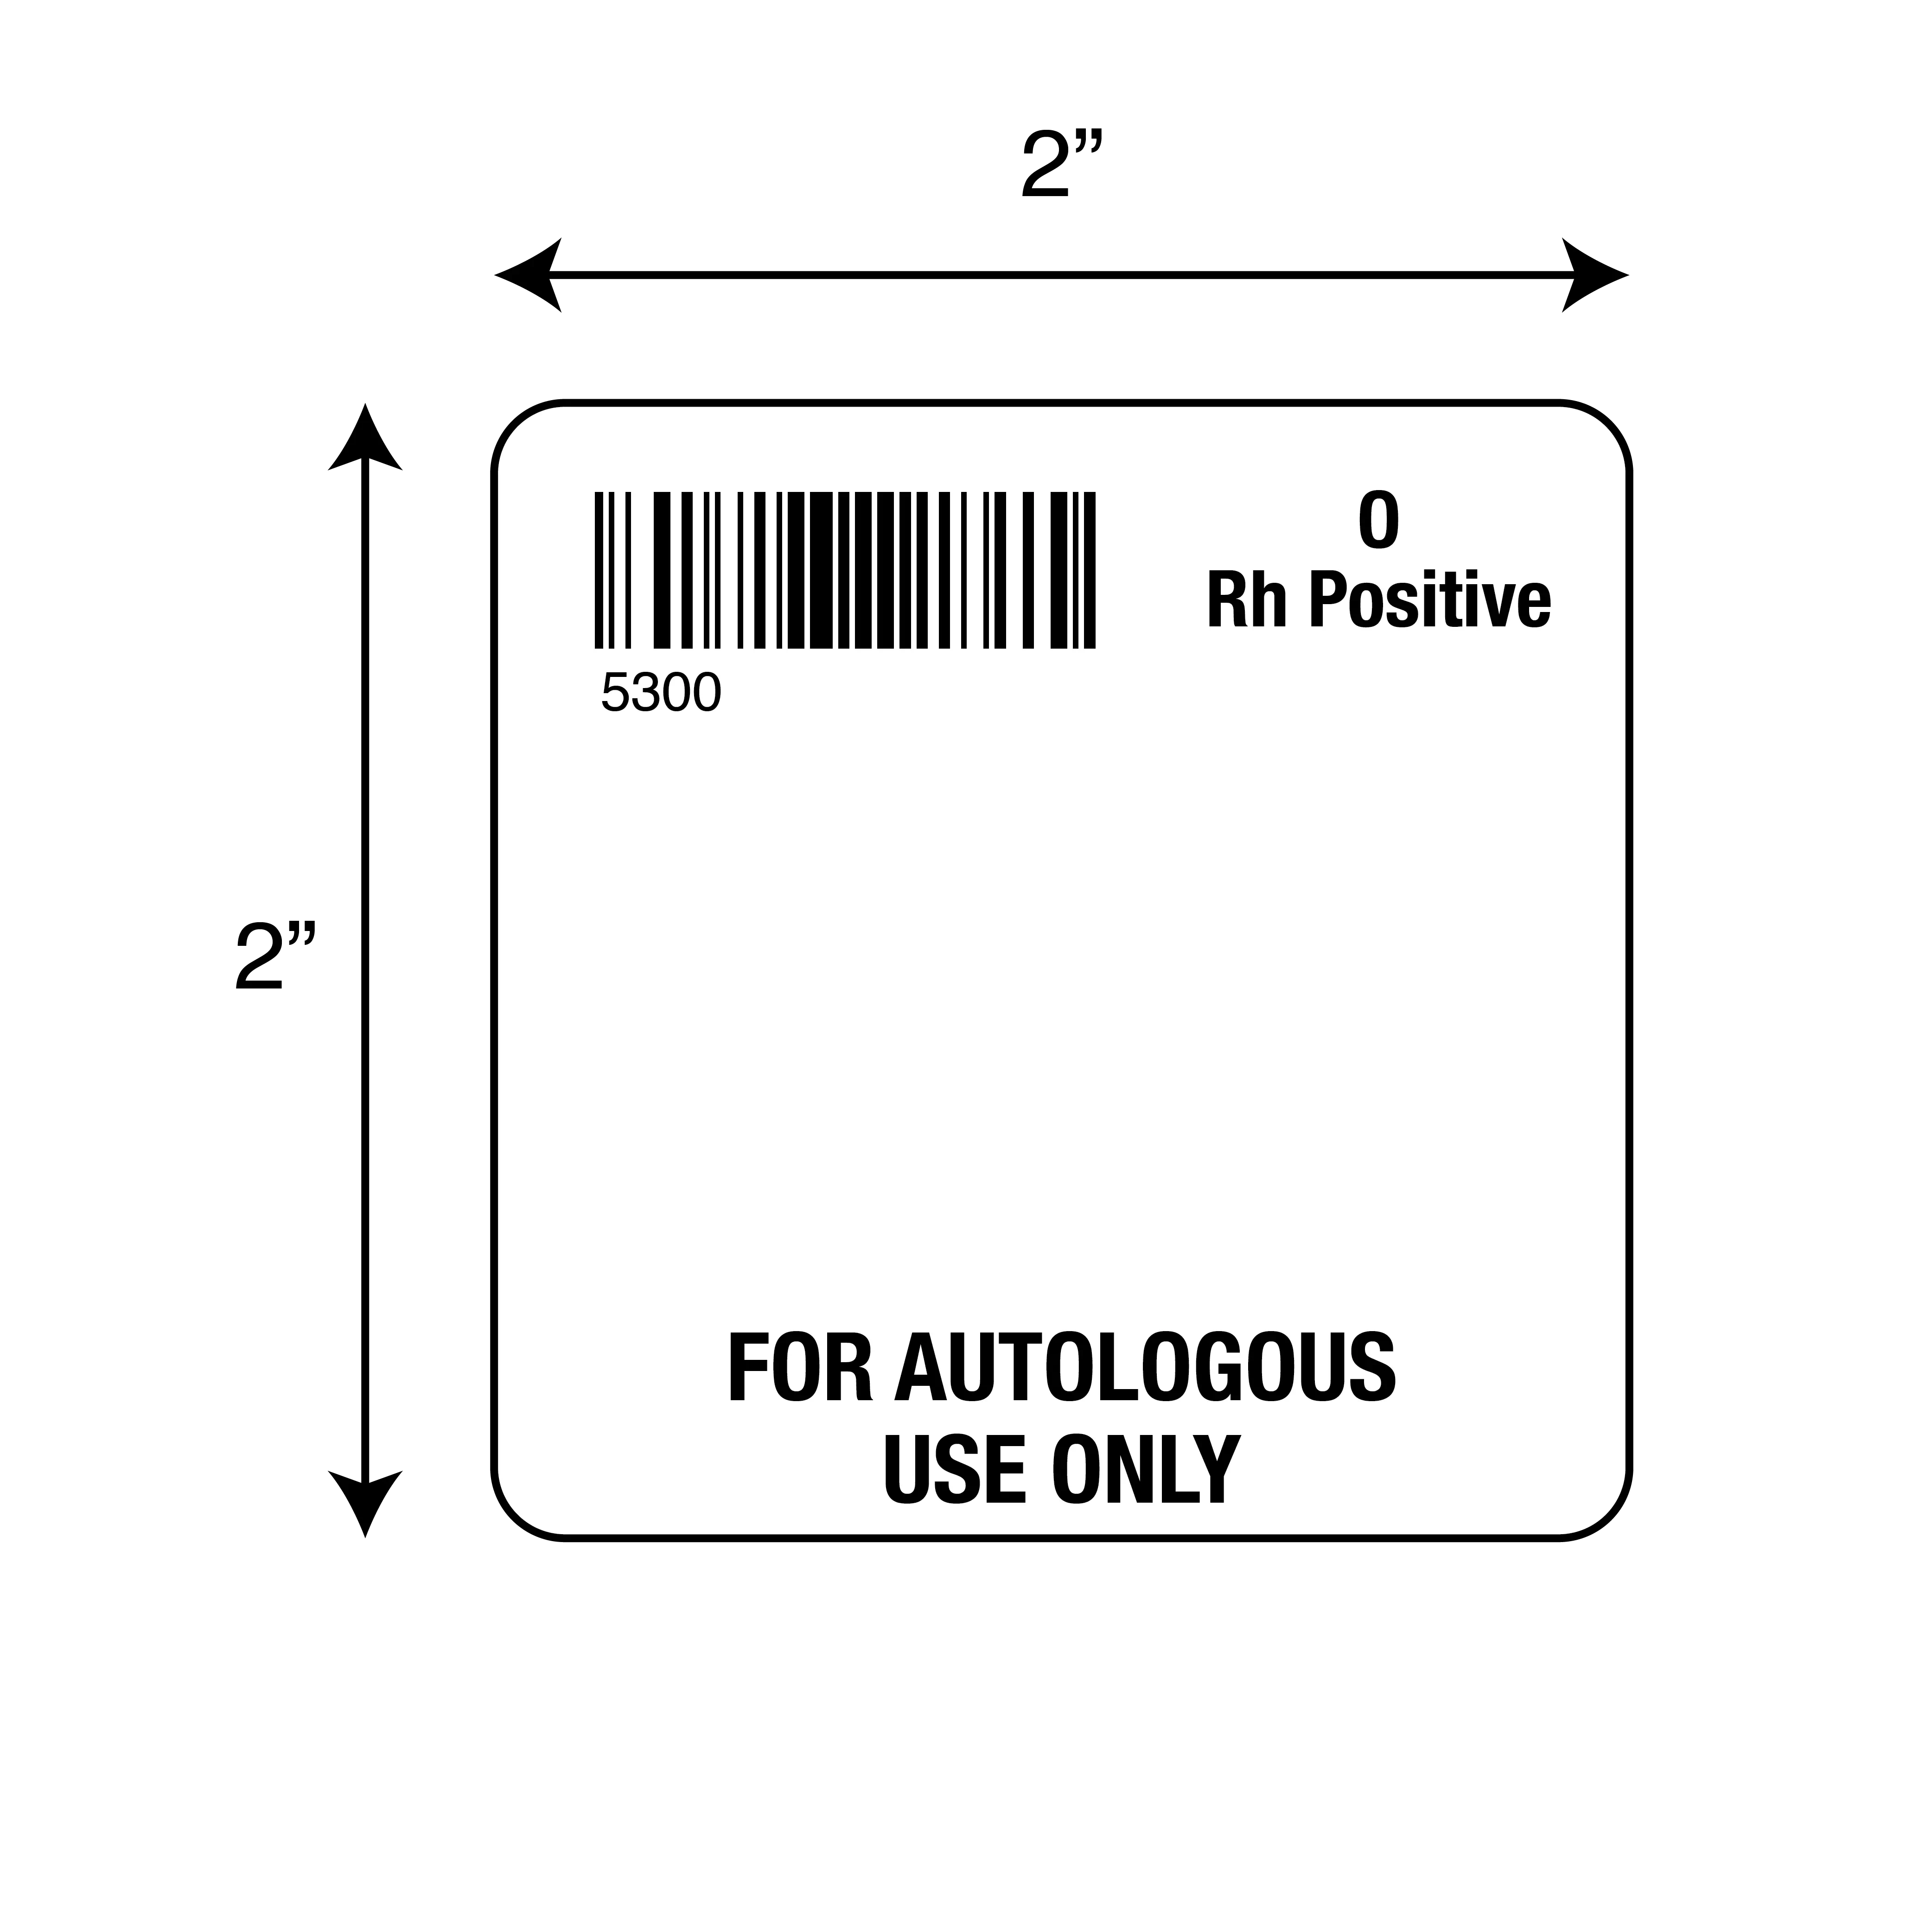 ISBT 128 O Rh Positive For Autologous Use Only